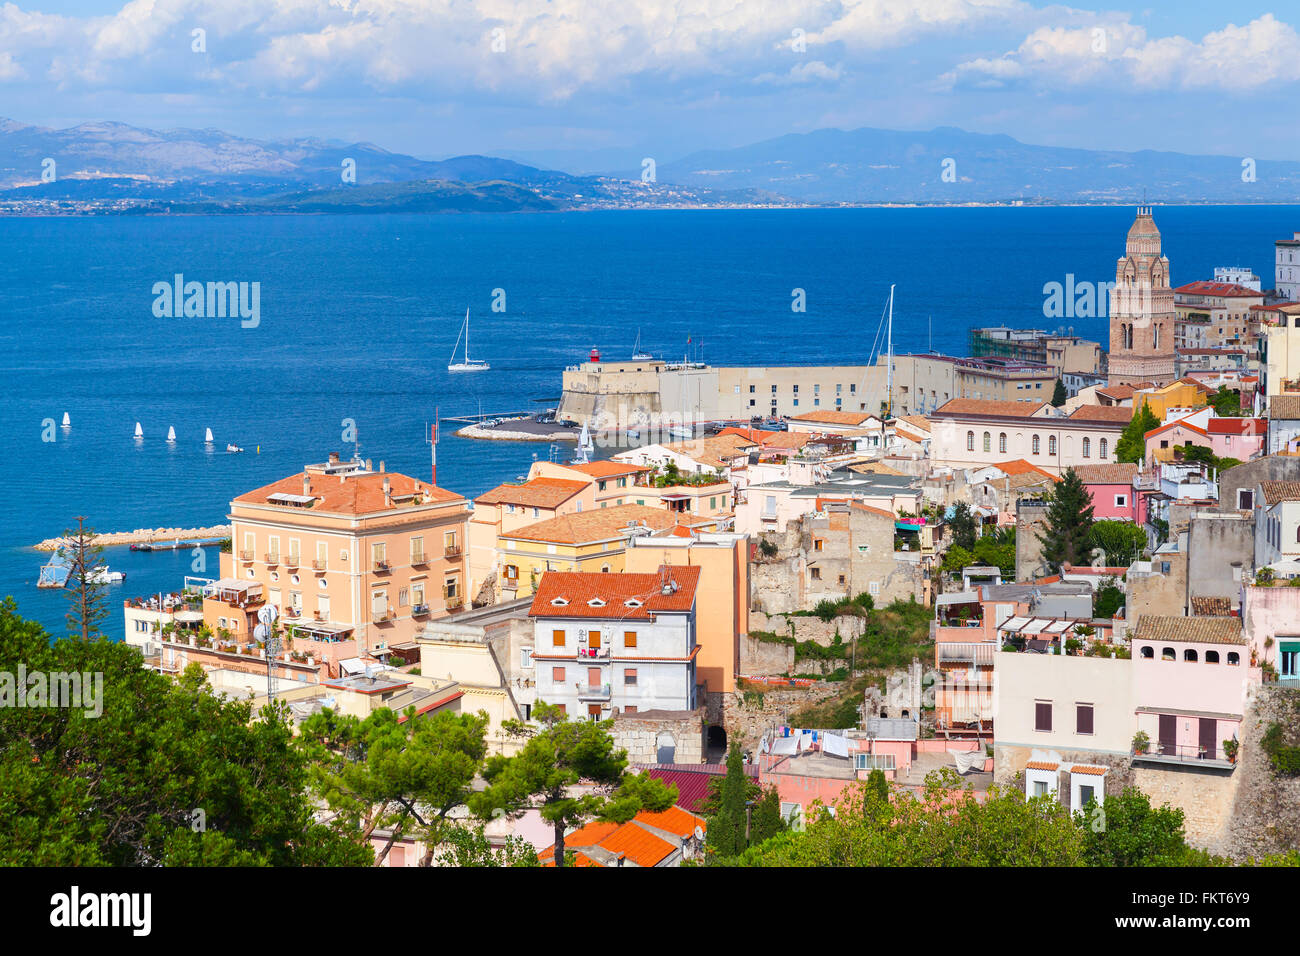 Cityscape of old part Gaeta town in summertime, Italy Stock Photo